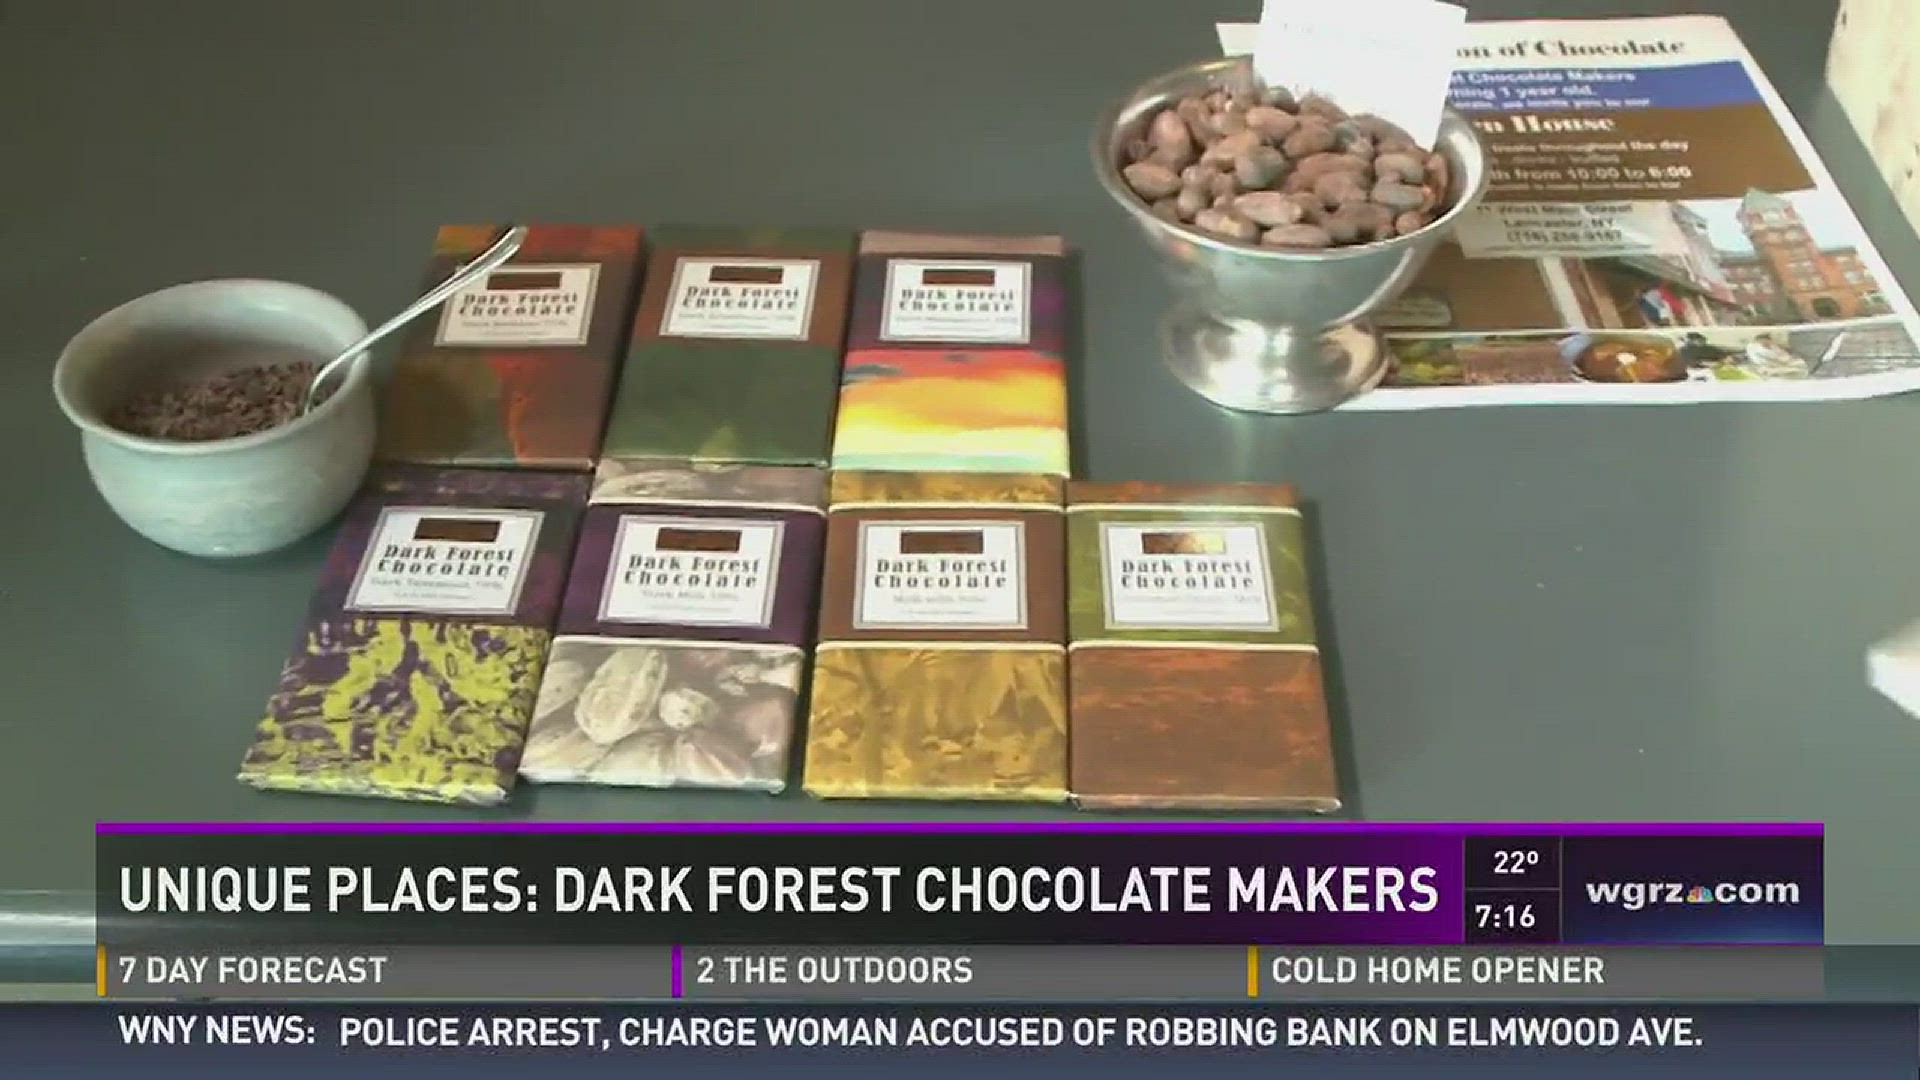 2 On Your Side's Dan Baran visited Dark Forest Chocolate Makers in this week's Unique Places.